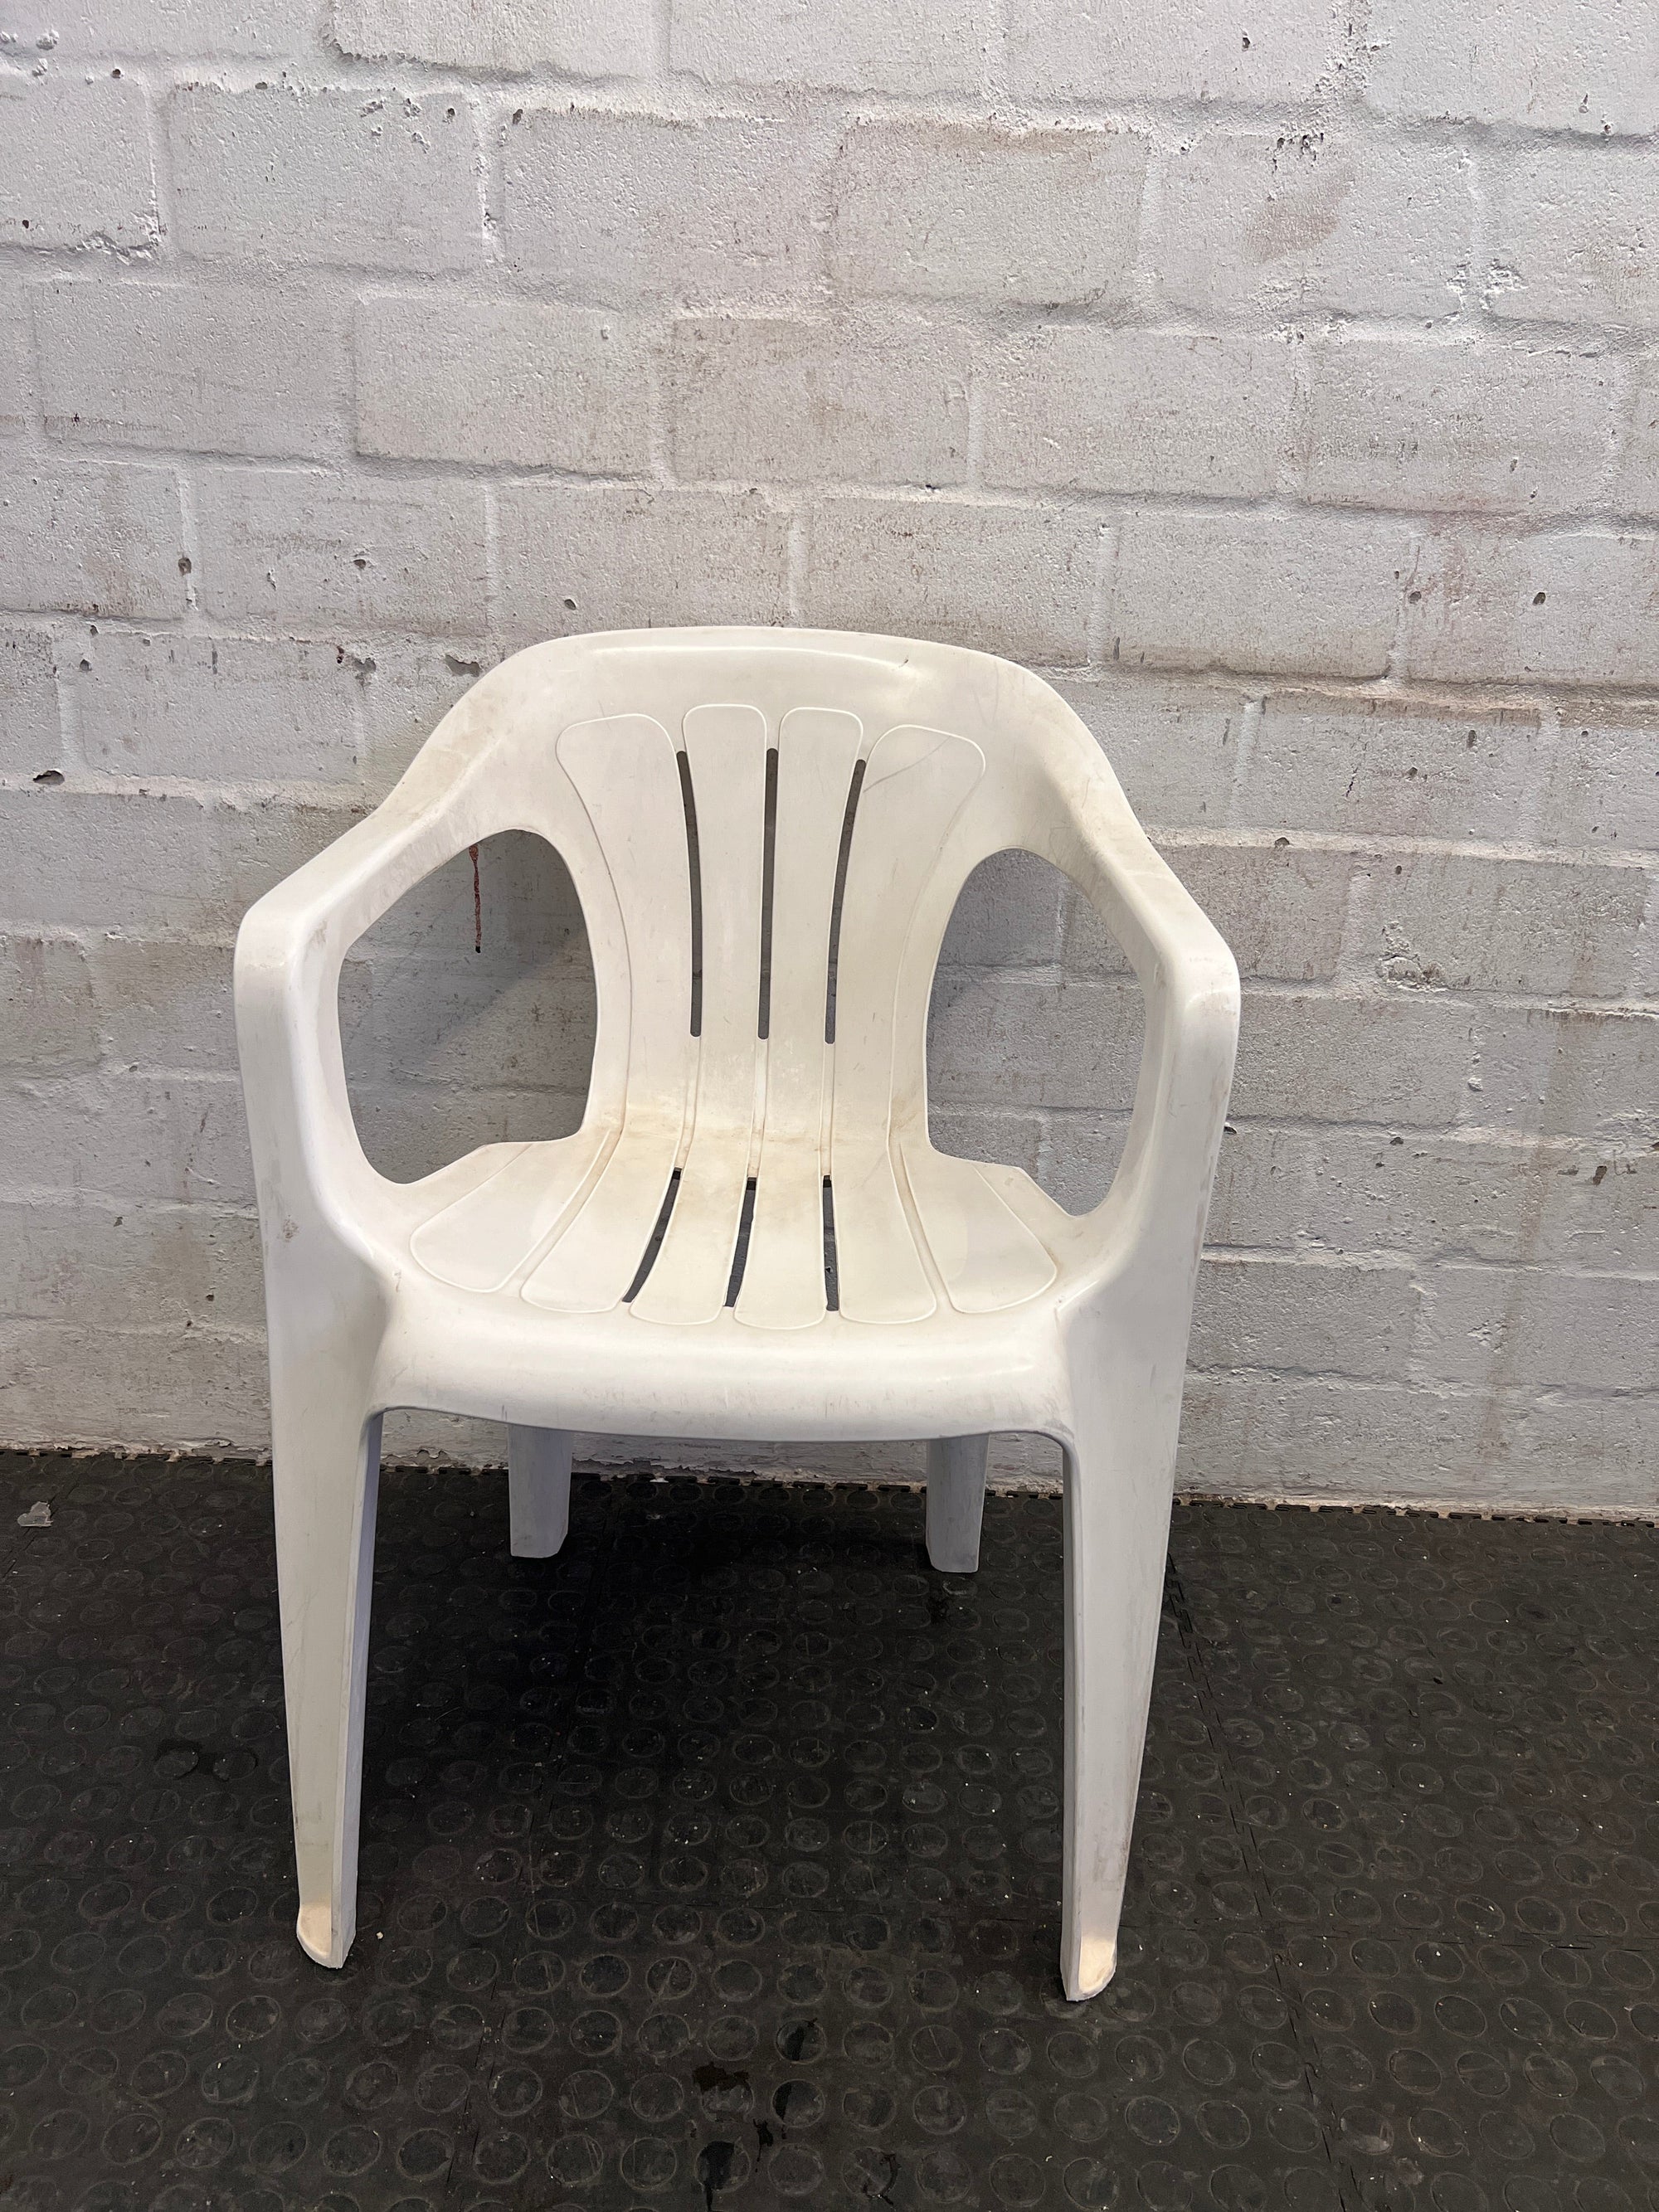 White Plastic Outdoor Chairs